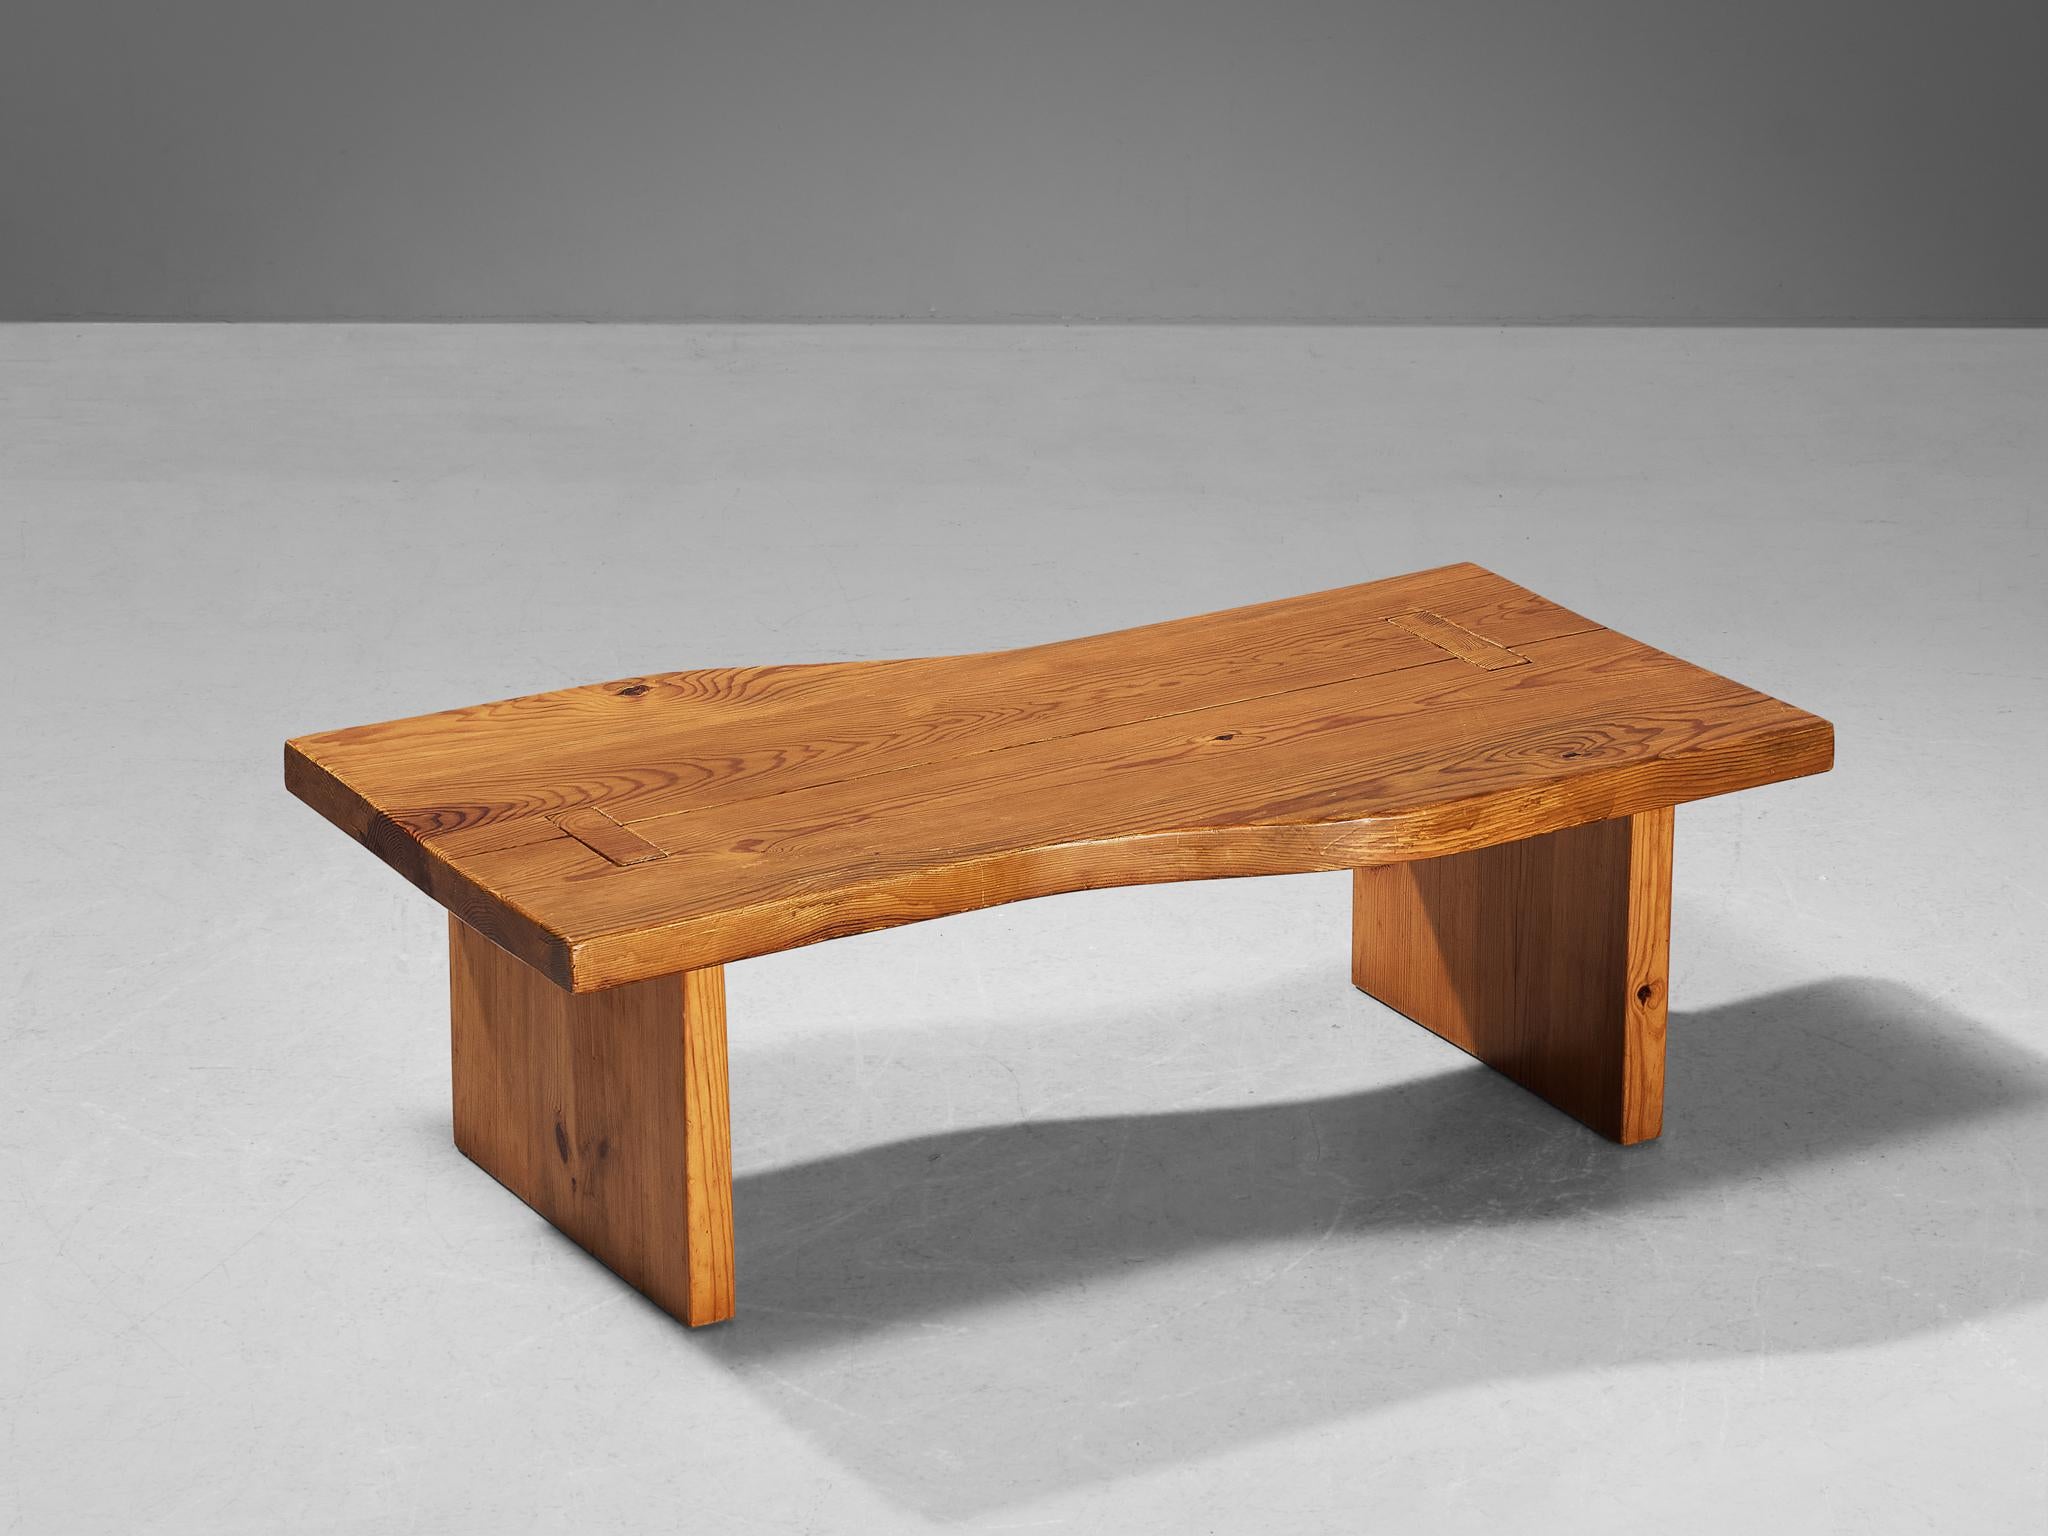 Maison Regain, coffee table, pine, France, 1970s

While the top convinces with its natural and dynamic appearance due to the organic, free flowing edges, the base is expressed through clear lines and symmetrical features. The mortise and tenon